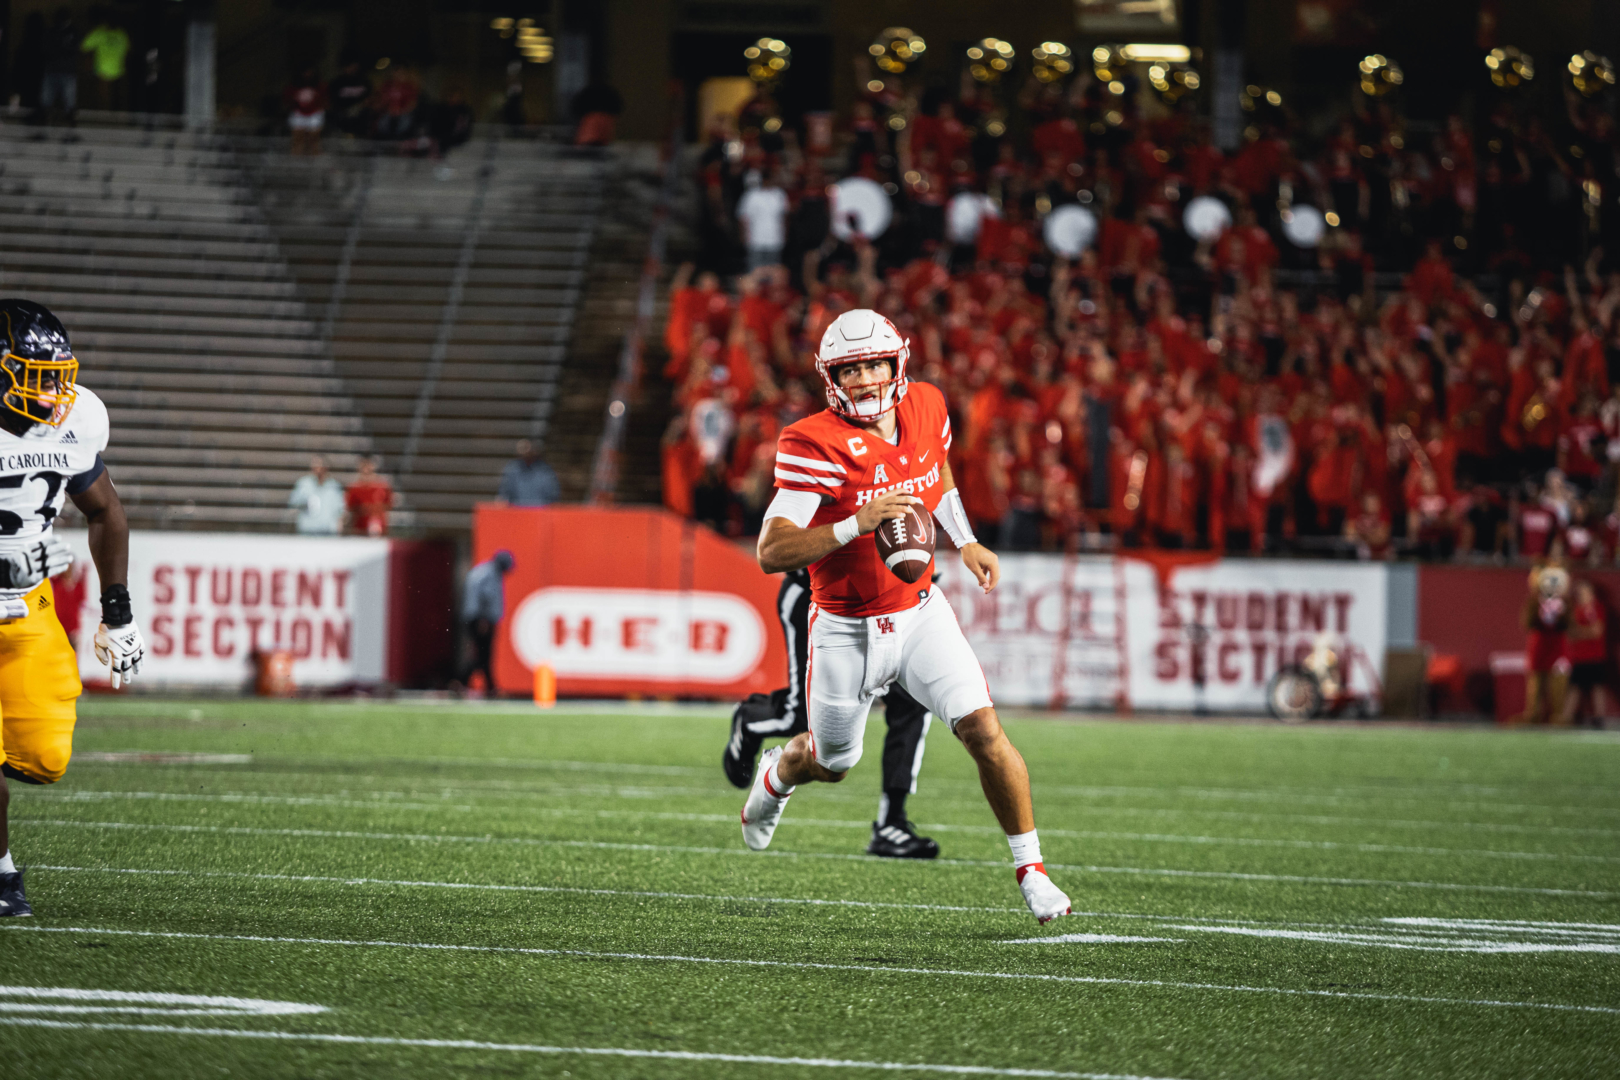 UH quarterback Clayton Tune scrambles during the Cougars' victory over ECU. | James Schillinger/The Cougar